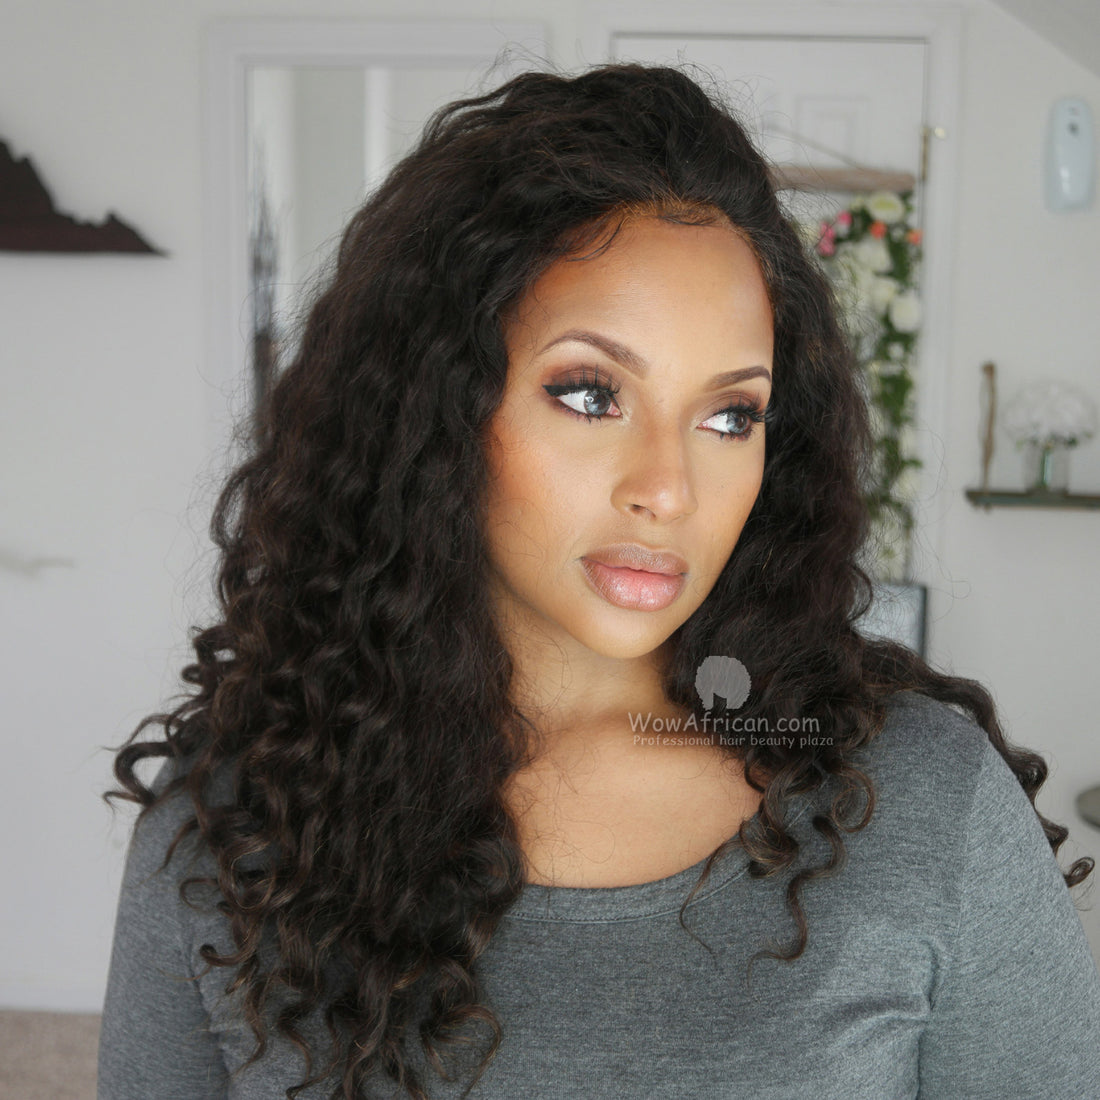 Achieve Flawless Hair with Full Lace Wigs: The Perfect Solution for Every Occasion